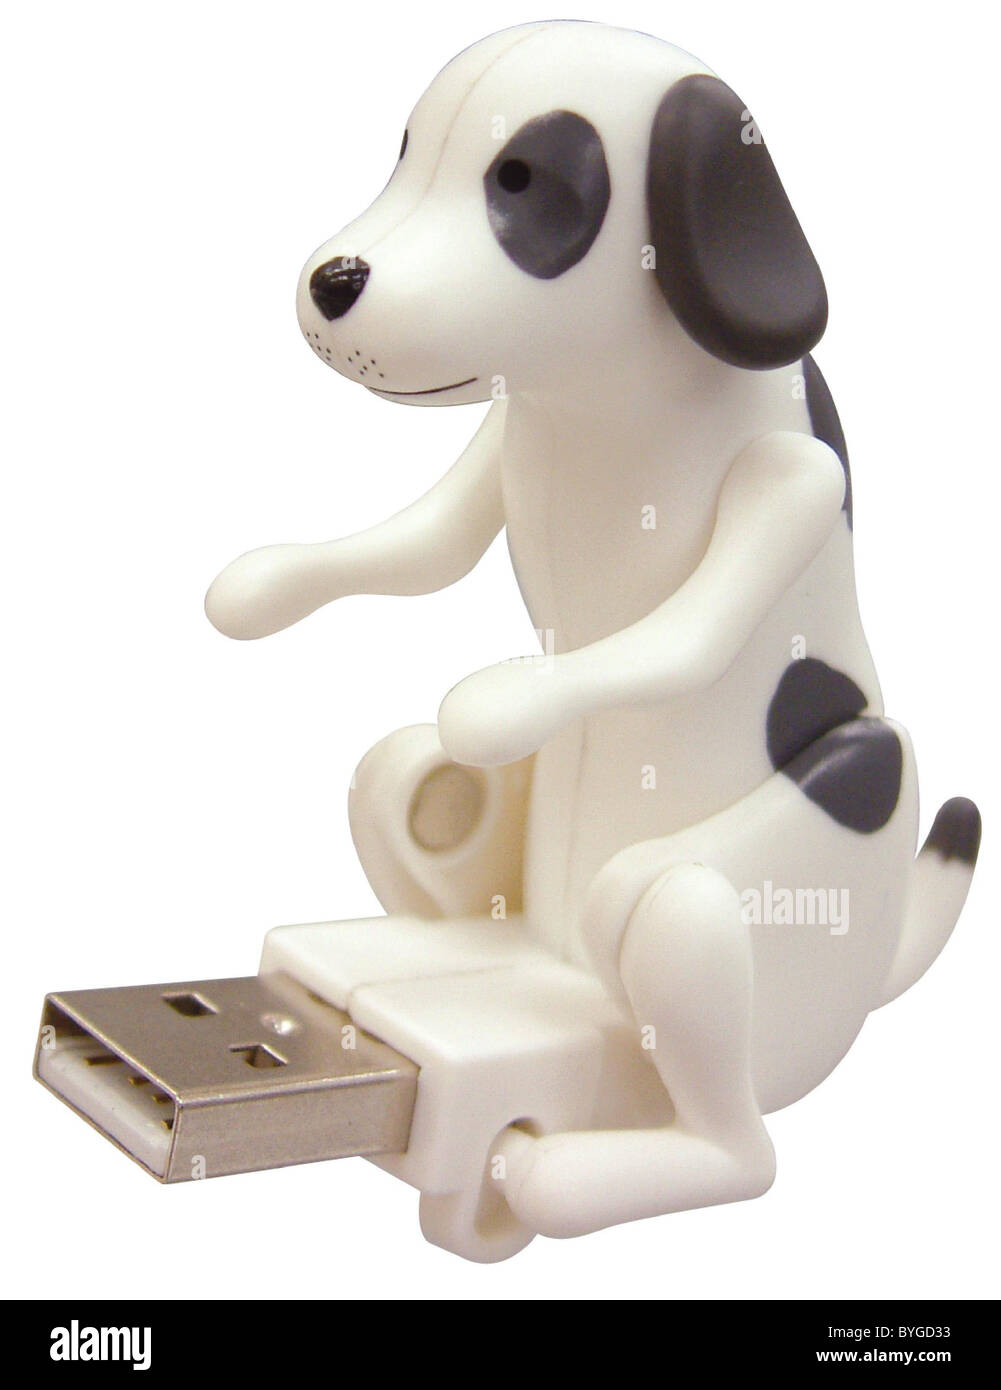 USB HUMPING DOG Surely designed for office workers with one thing on their  mind, the USB Humping Dog can while away the hours Stock Photo - Alamy